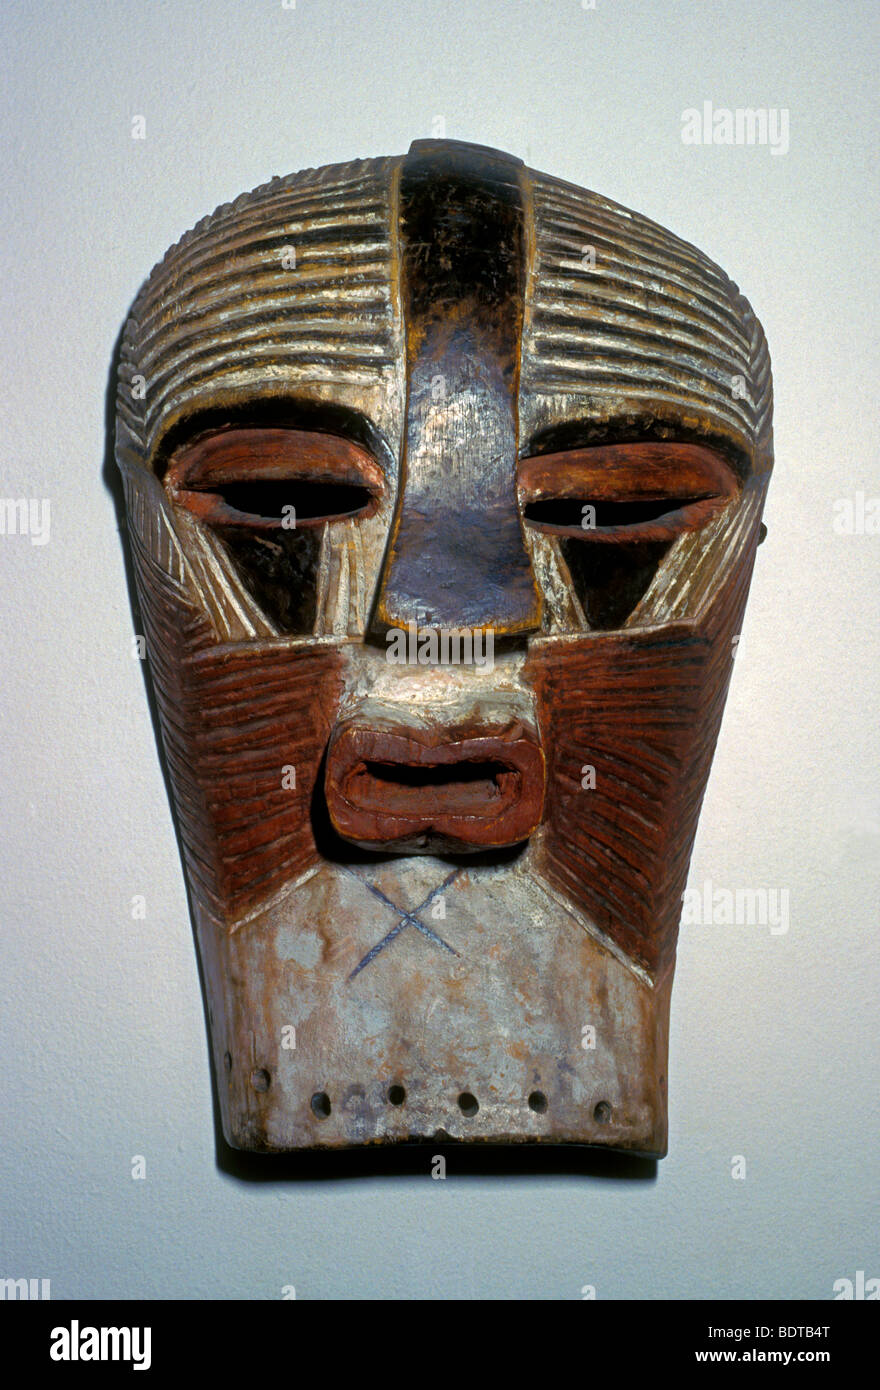 dance mask, mask, made of wood, 41x25x18 cm, National Gallery, city of Harare, Harare, Harare Province, Zimbabwe, Africa Stock Photo